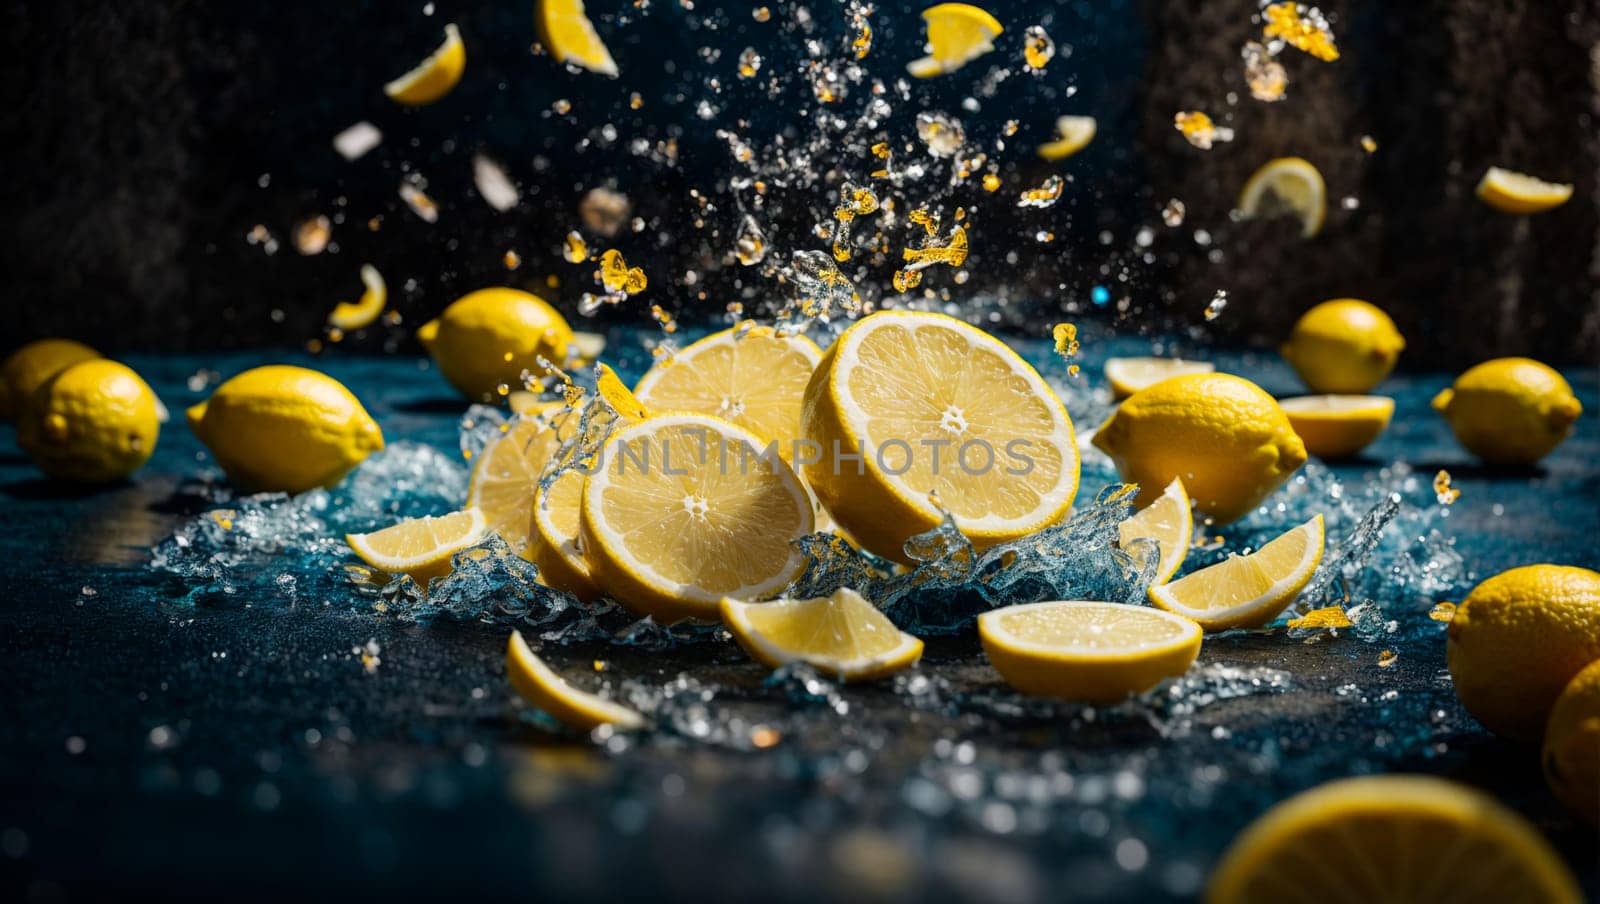 an explosion of bright colors of lemon slices in the air and water against a background of deep dark blue and bluish shades.